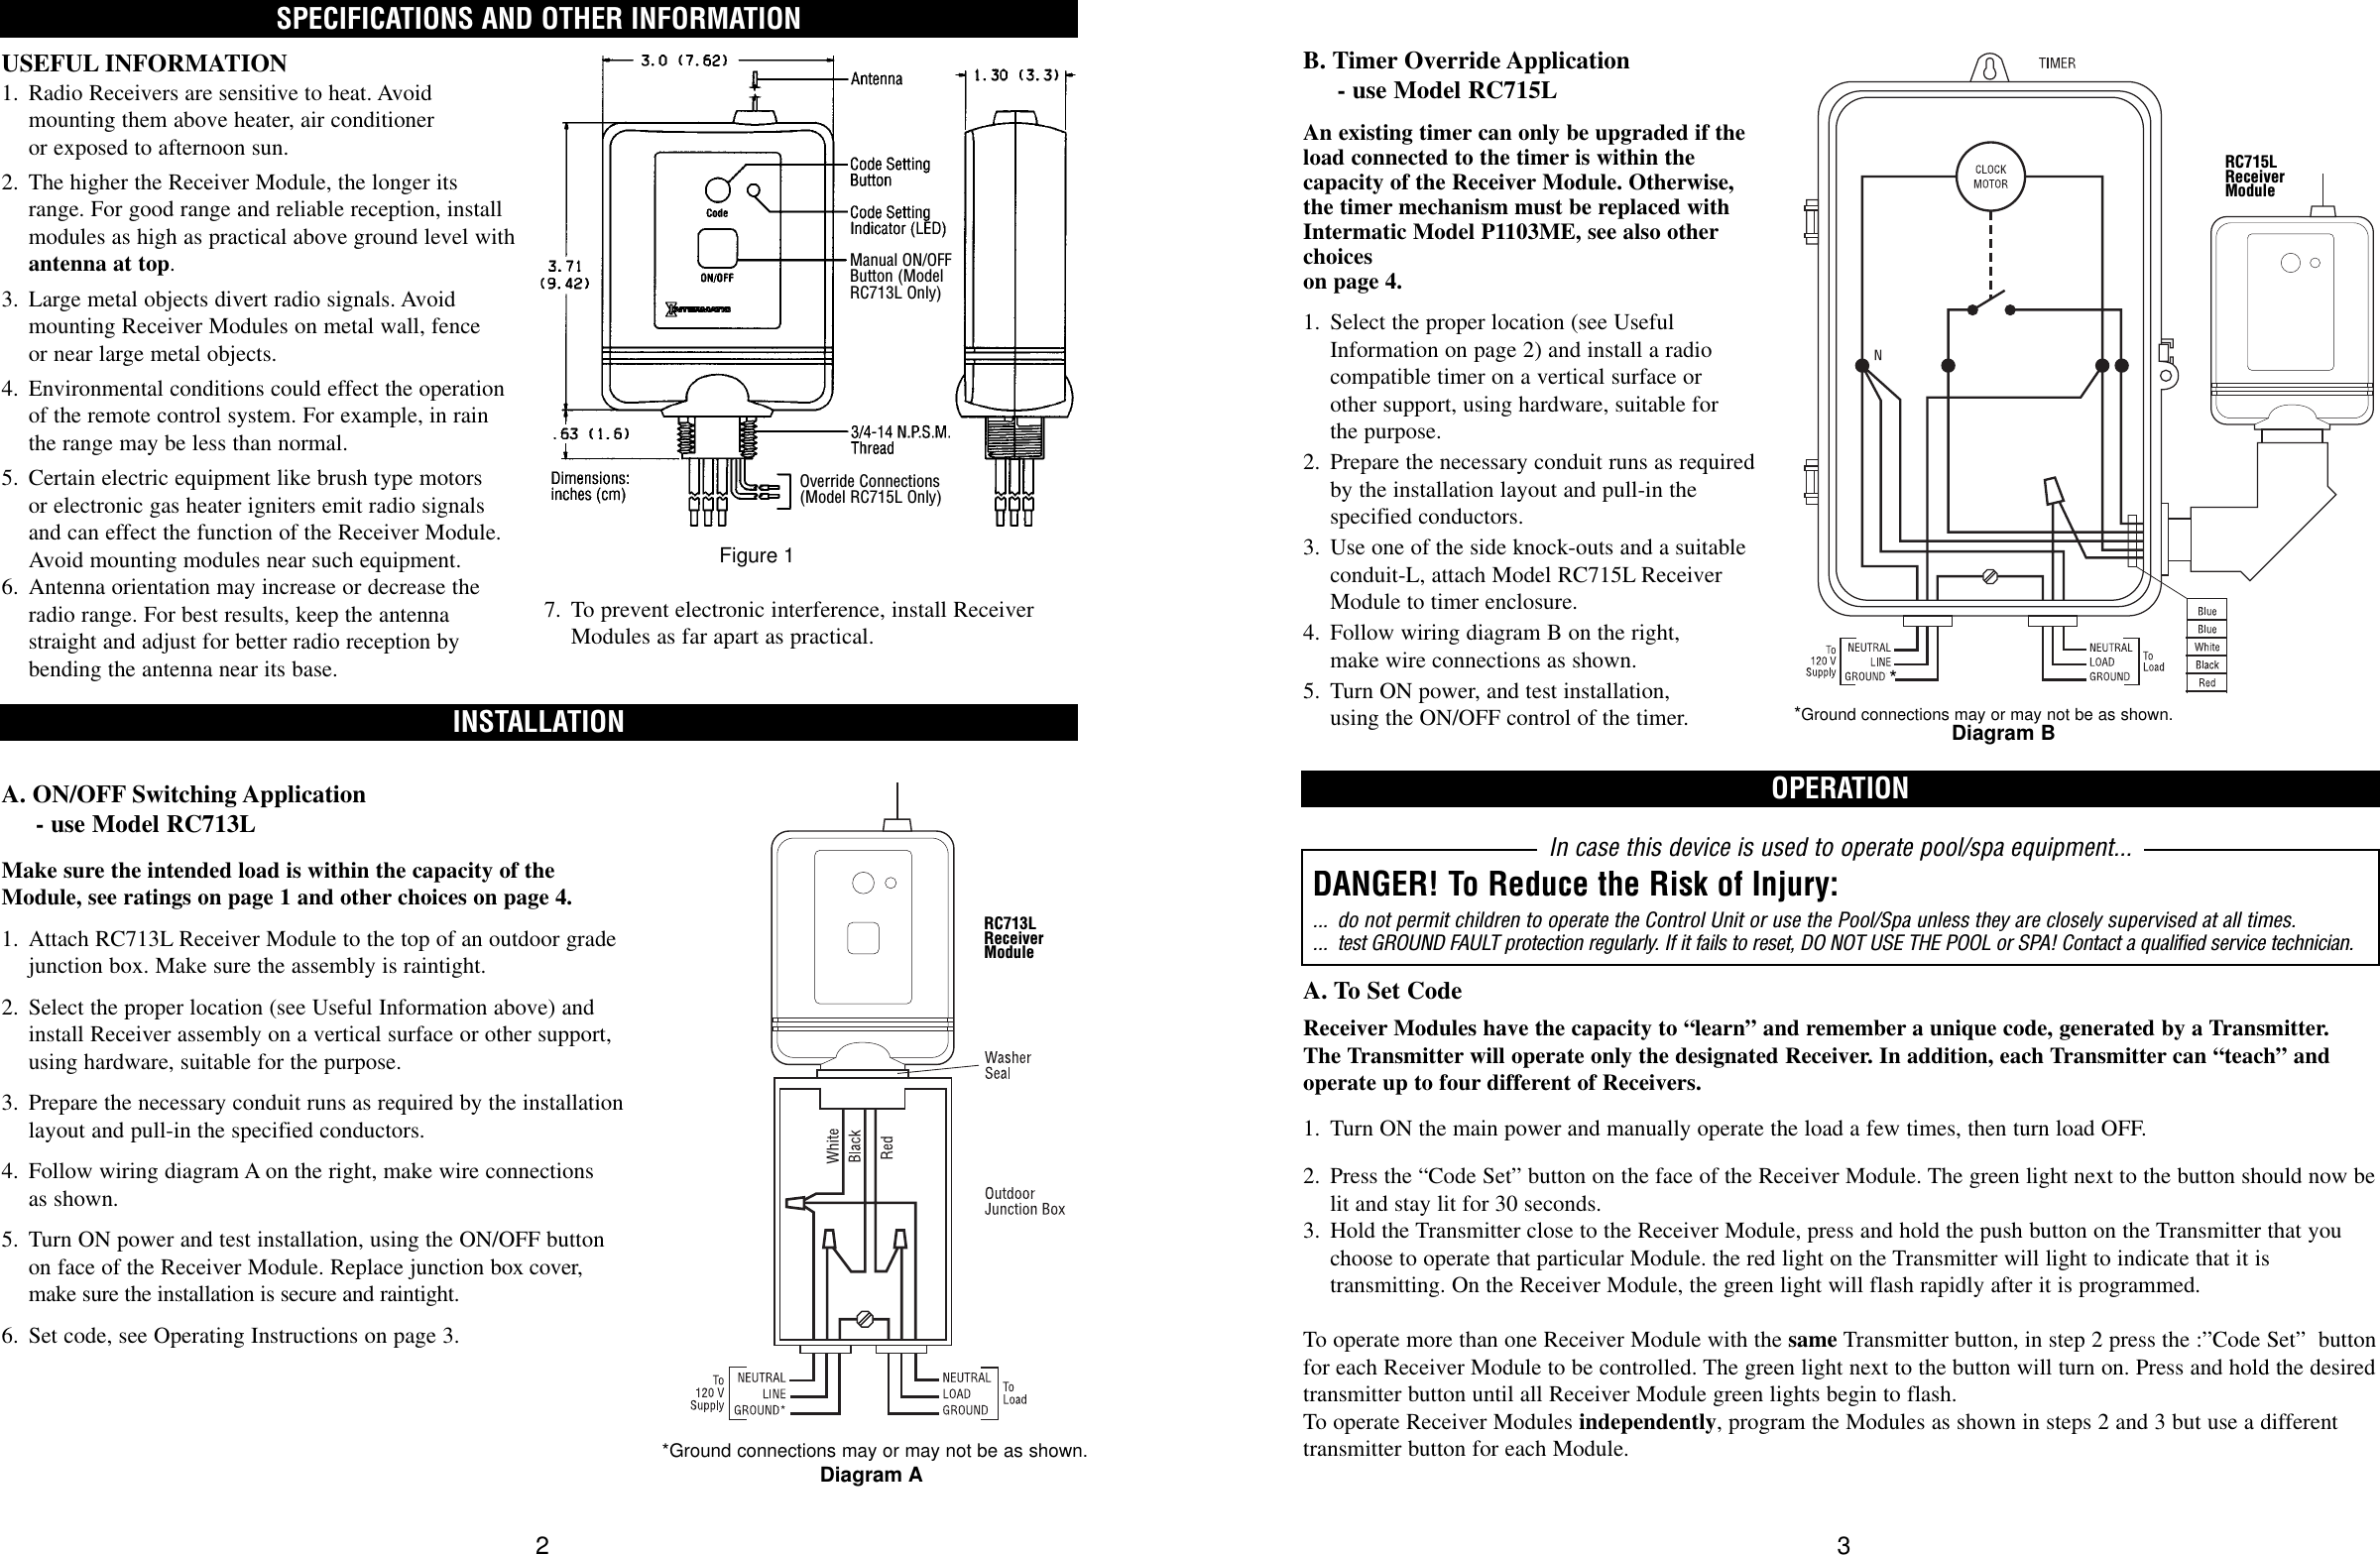 SPECIFICATIONS AND OTHER INFORMATIONINSTALLATIONUSEFUL INFORMATION1. Radio Receivers are sensitive to heat. Avoid mounting them above heater, air conditioner or exposed to afternoon sun.2. The higher the Receiver Module, the longer itsrange. For good range and reliable reception, installmodules as high as practical above ground level withantenna at top.3. Large metal objects divert radio signals. Avoidmounting Receiver Modules on metal wall, fence or near large metal objects.4. Environmental conditions could effect the operationof the remote control system. For example, in rainthe range may be less than normal.5. Certain electric equipment like brush type motors or electronic gas heater igniters emit radio signalsand can effect the function of the Receiver Module.Avoid mounting modules near such equipment.6. Antenna orientation may increase or decrease the radio range. For best results, keep the antenna straight and adjust for better radio reception by bending the antenna near its base.A. ON/OFF Switching Application - use Model RC713LMake sure the intended load is within the capacity of theModule, see ratings on page 1 and other choices on page 4.1. Attach RC713L Receiver Module to the top of an outdoor gradejunction box. Make sure the assembly is raintight.2. Select the proper location (see Useful Information above) andinstall Receiver assembly on a vertical surface or other support,using hardware, suitable for the purpose.3. Prepare the necessary conduit runs as required by the installationlayout and pull-in the specified conductors.4. Follow wiring diagram A on the right, make wire connections as shown.5. Turn ON power and test installation, using the ON/OFF buttonon face of the Receiver Module. Replace junction box cover,make sure the installation is secure and raintight.6. Set code, see Operating Instructions on page 3.2OPERATIONB. Timer Override Application - use Model RC715LAn existing timer can only be upgraded if theload connected to the timer is within thecapacity of the Receiver Module. Otherwise,the timer mechanism must be replaced withIntermatic Model P1103ME, see also otherchoices on page 4.1. Select the proper location (see UsefulInformation on page 2) and install a radiocompatible timer on a vertical surface or other support, using hardware, suitable for the purpose.2. Prepare the necessary conduit runs as requiredby the installation layout and pull-in the specified conductors.3. Use one of the side knock-outs and a suitable conduit-L, attach Model RC715L ReceiverModule to timer enclosure.4. Follow wiring diagram B on the right, make wire connections as shown.5. Turn ON power, and test installation, using the ON/OFF control of the timer.A. To Set CodeReceiver Modules have the capacity to “learn” and remember a unique code, generated by a Transmitter. The Transmitter will operate only the designated Receiver. In addition, each Transmitter can “teach” andoperate up to four different of Receivers. 1. Turn ON the main power and manually operate the load a few times, then turn load OFF.2. Press the “Code Set” button on the face of the Receiver Module. The green light next to the button should now belit and stay lit for 30 seconds.3. Hold the Transmitter close to the Receiver Module, press and hold the push button on the Transmitter that you choose to operate that particular Module. the red light on the Transmitter will light to indicate that it is transmitting. On the Receiver Module, the green light will flash rapidly after it is programmed.To operate more than one Receiver Module with the same Transmitter button, in step 2 press the :”Code Set”  buttonfor each Receiver Module to be controlled. The green light next to the button will turn on. Press and hold the desiredtransmitter button until all Receiver Module green lights begin to flash.To operate Receiver Modules independently, program the Modules as shown in steps 2 and 3 but use a differenttransmitter button for each Module.3In case this device is used to operate pool/spa equipment...DANGER! To Reduce the Risk of Injury:... do not permit children to operate the Control Unit or use the Pool/Spa unless they are closely supervised at all times.... test GROUND FAULT protection regularly. If it fails to reset, DO NOT USE THE POOL or SPA! Contact a qualified service technician.Manual ON/OFFButton (ModelRC713L Only)Override Connections(Model RC715L Only)7. To prevent electronic interference, install ReceiverModules as far apart as practical.Figure 1*Ground connections may or may not be as shown.Diagram A*Ground connections may or may not be as shown.Diagram B*RC713LReceiverModuleRC715LReceiverModule